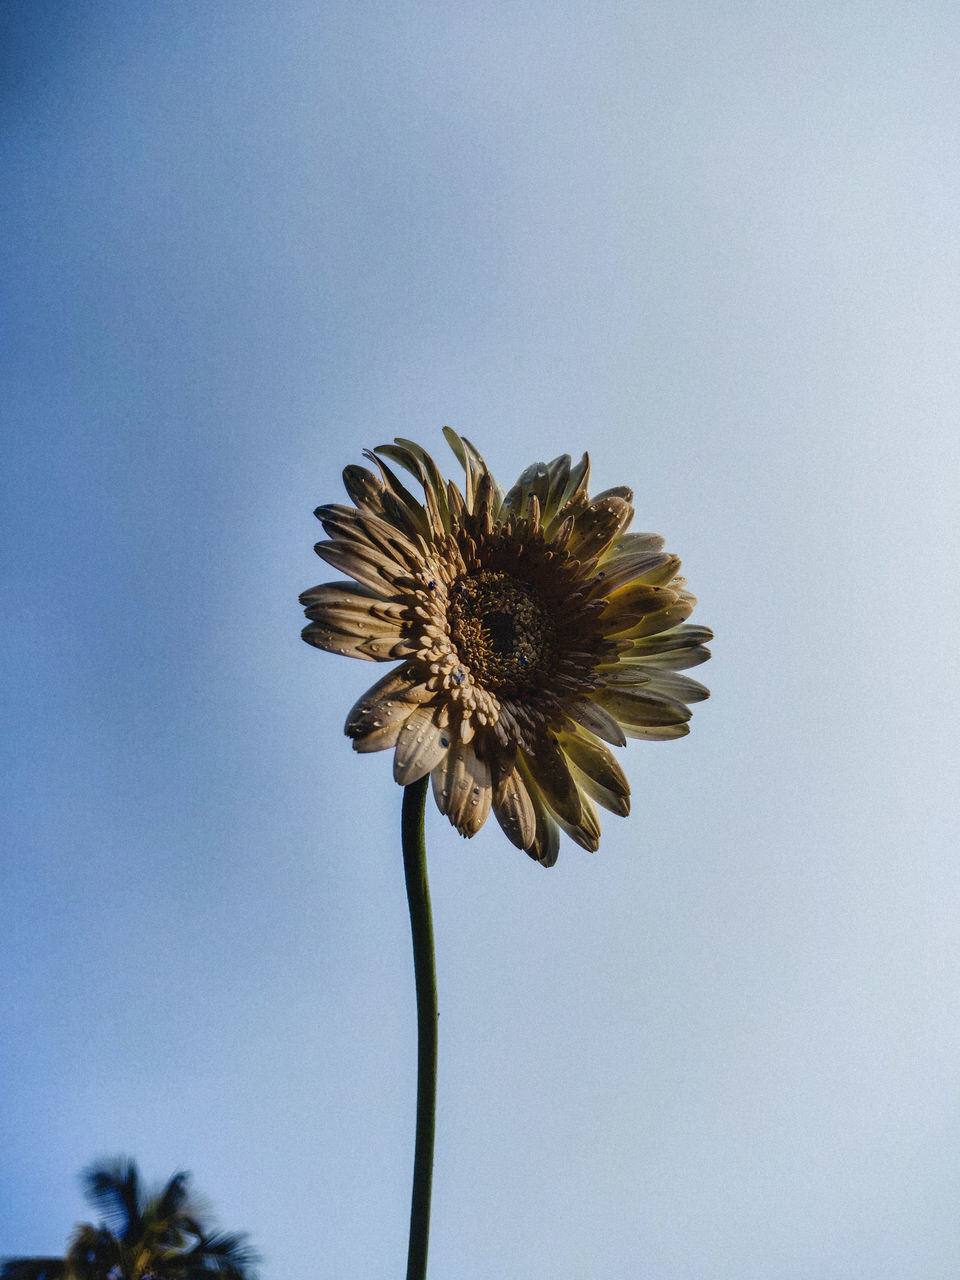 CLOSE-UP OF WILTED FLOWER AGAINST CLEAR SKY